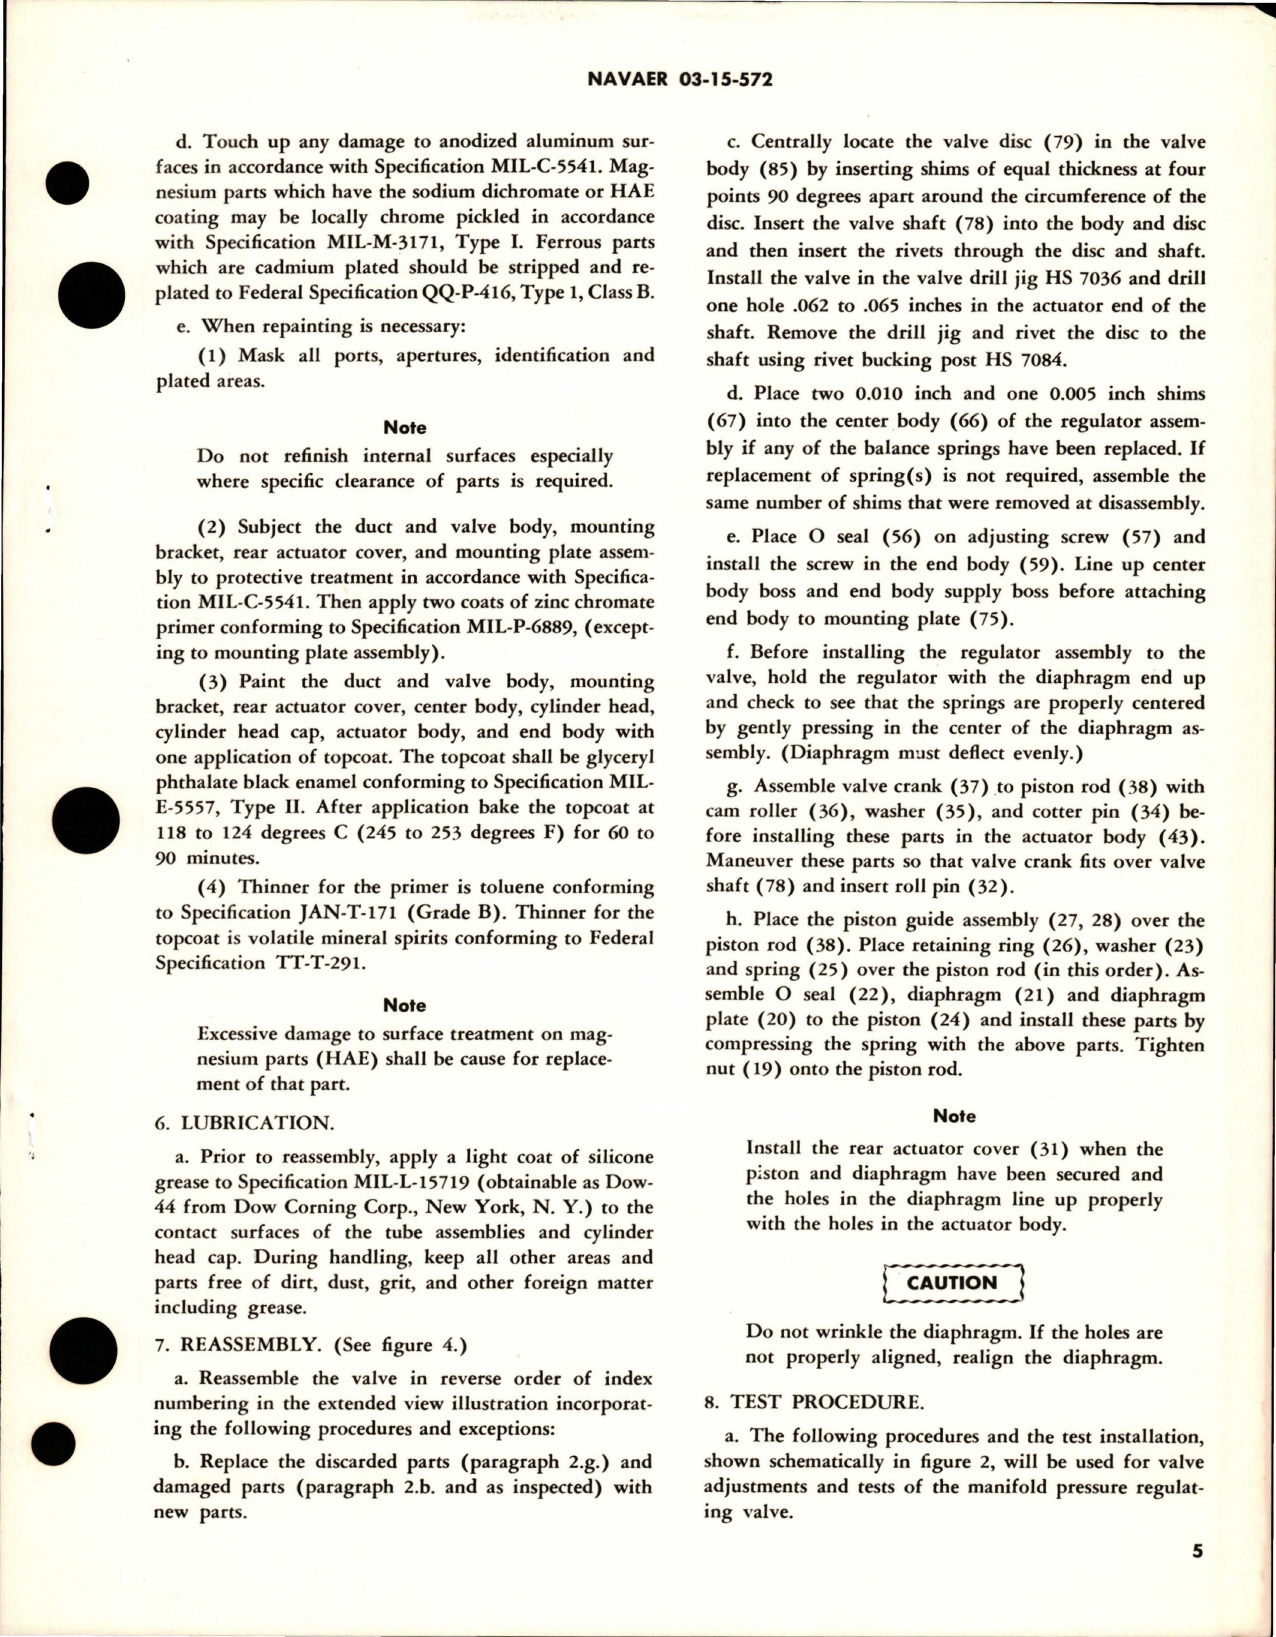 Sample page 5 from AirCorps Library document: Overhaul Instructions with Parts for Manifold Pressure Regulator Valve - Assembly No. 97000